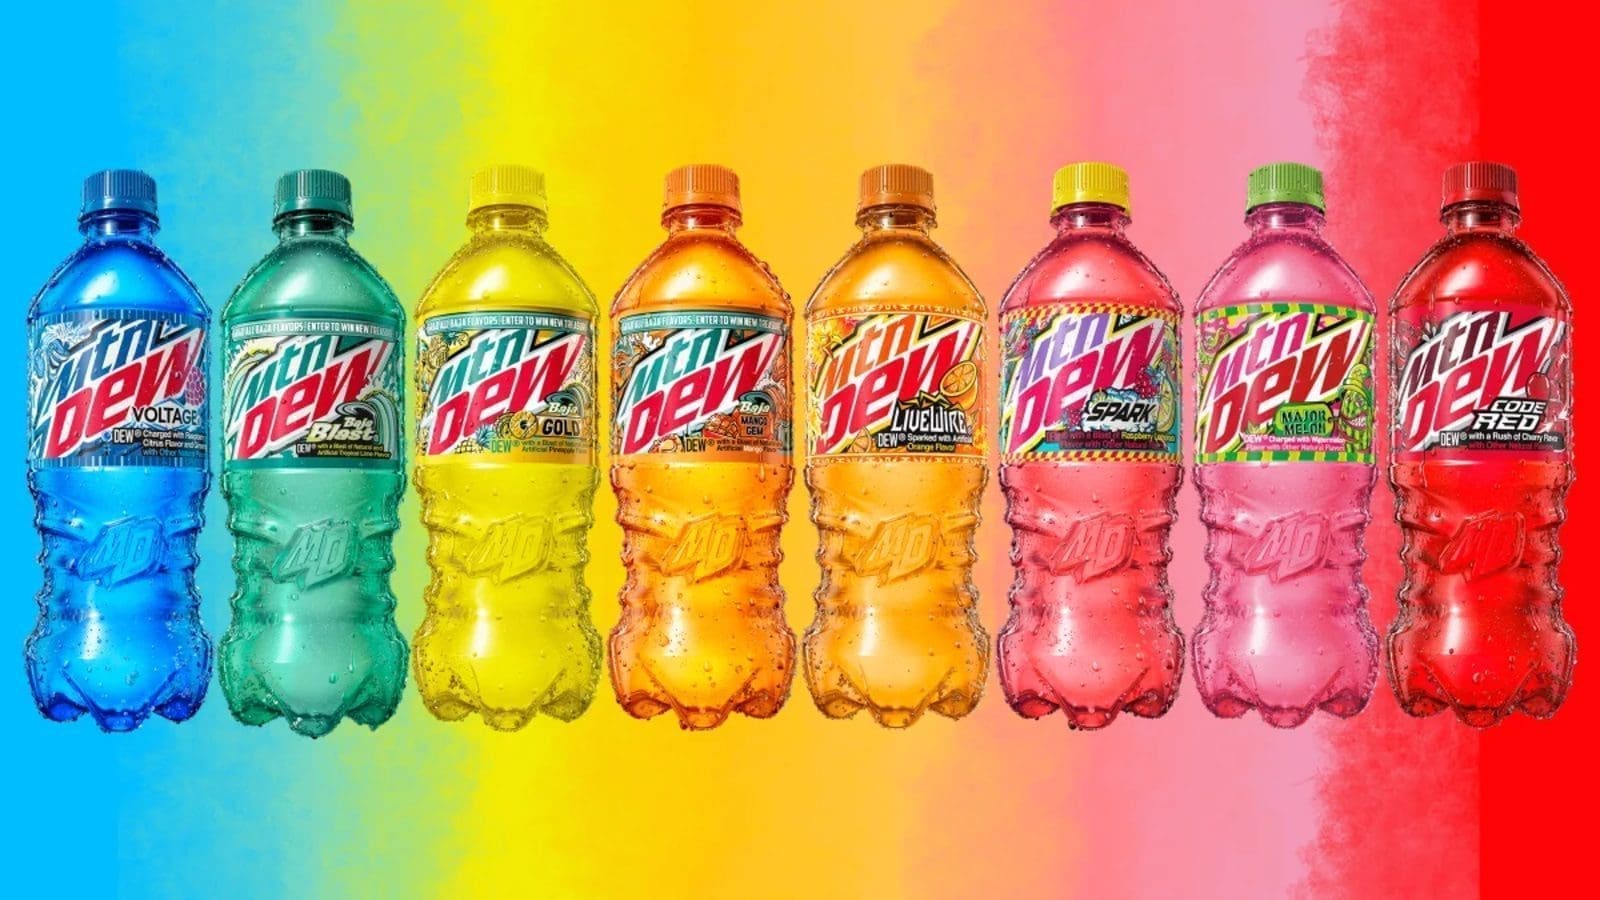 PepsiCo wins over exclusive rights over ‘Mountain Dew’ trademark against MagFast Beverages